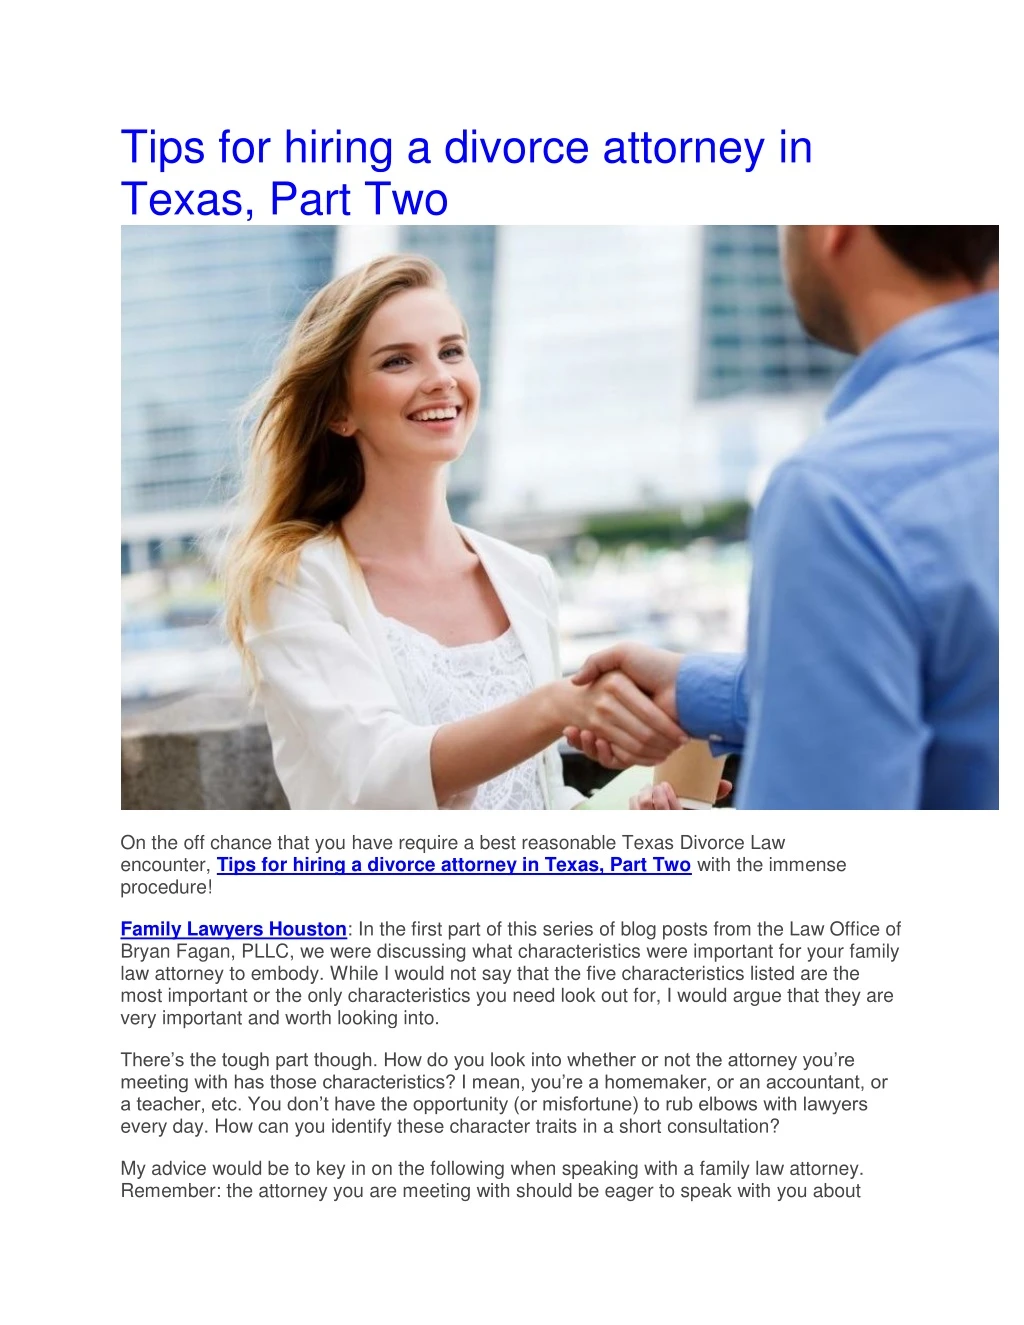 tips for hiring a divorce attorney in texas part